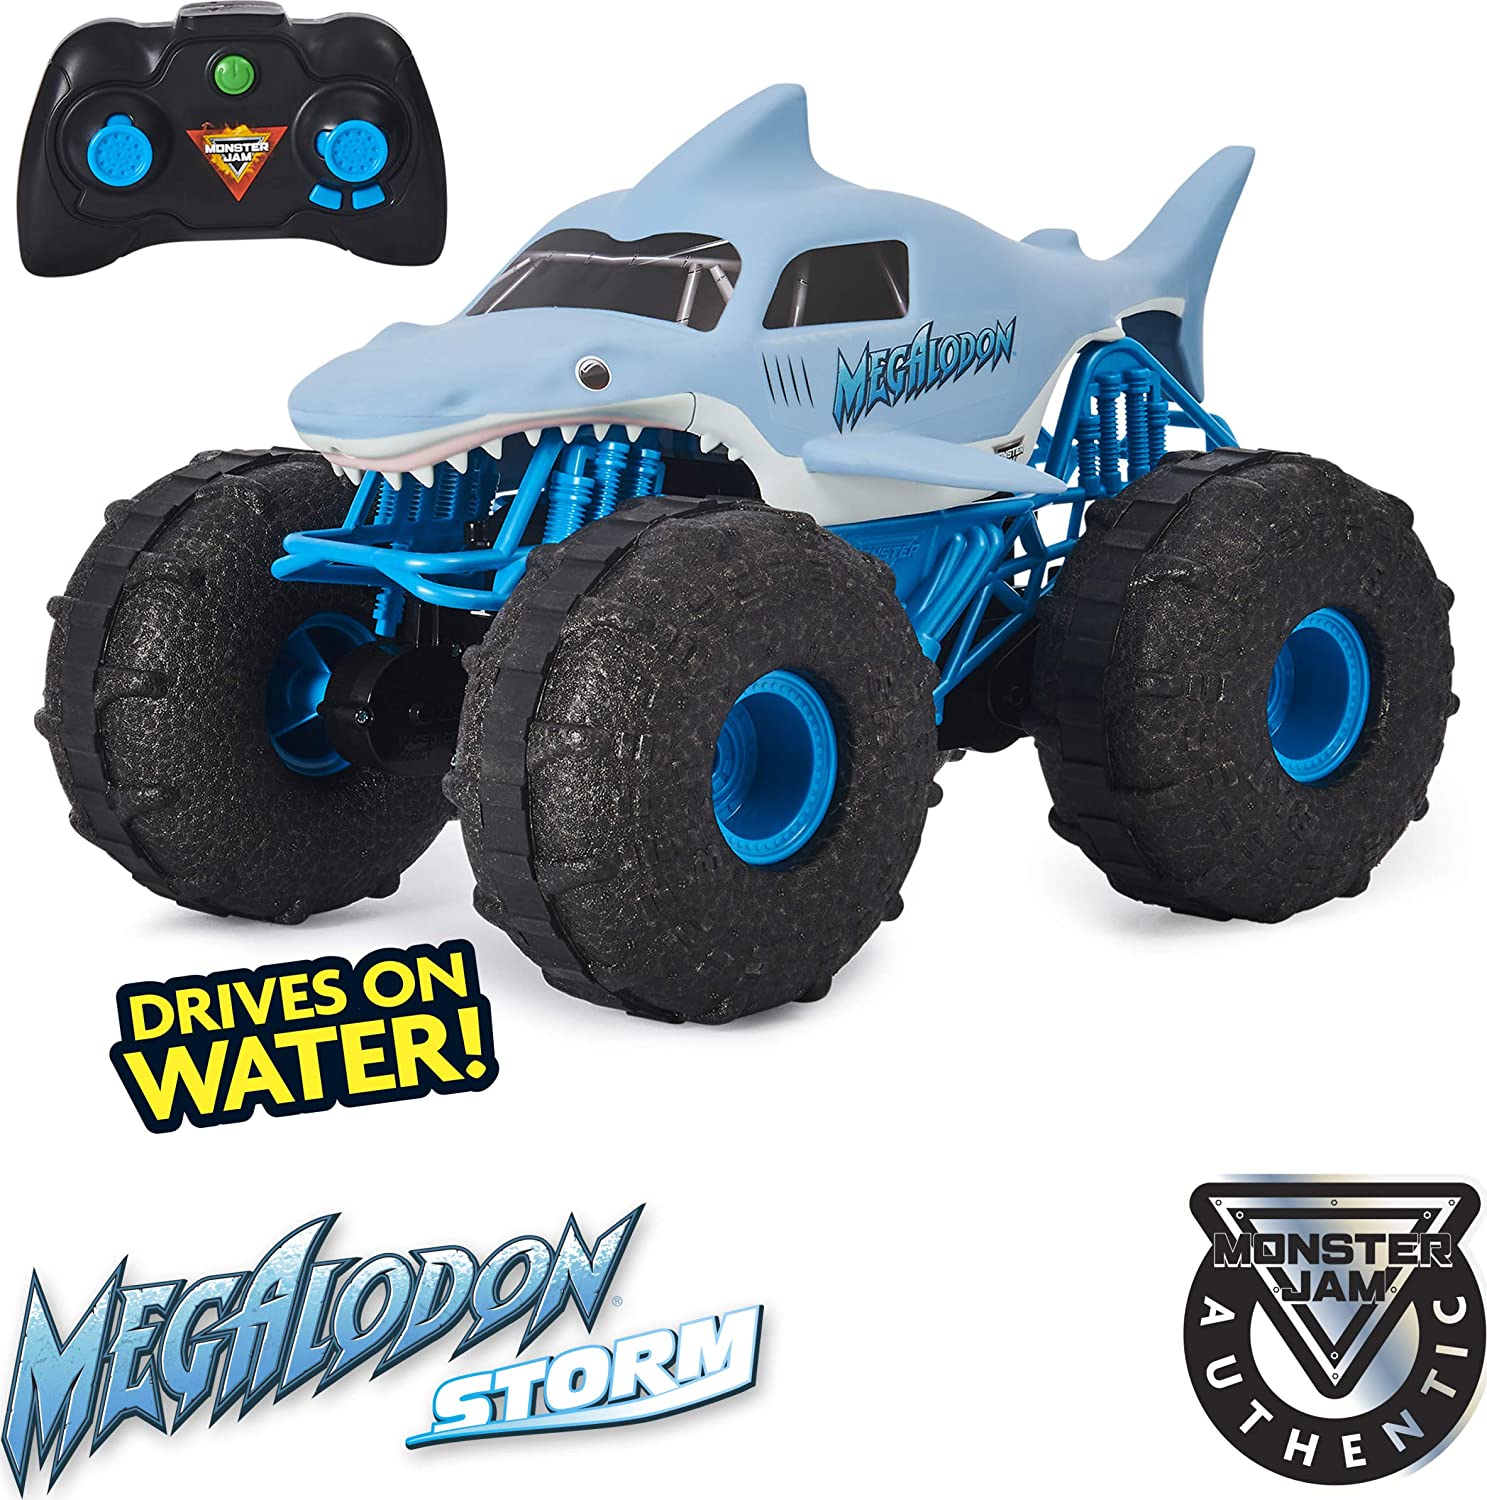 Megalodon Storm Thrasher radio Controlled Truck